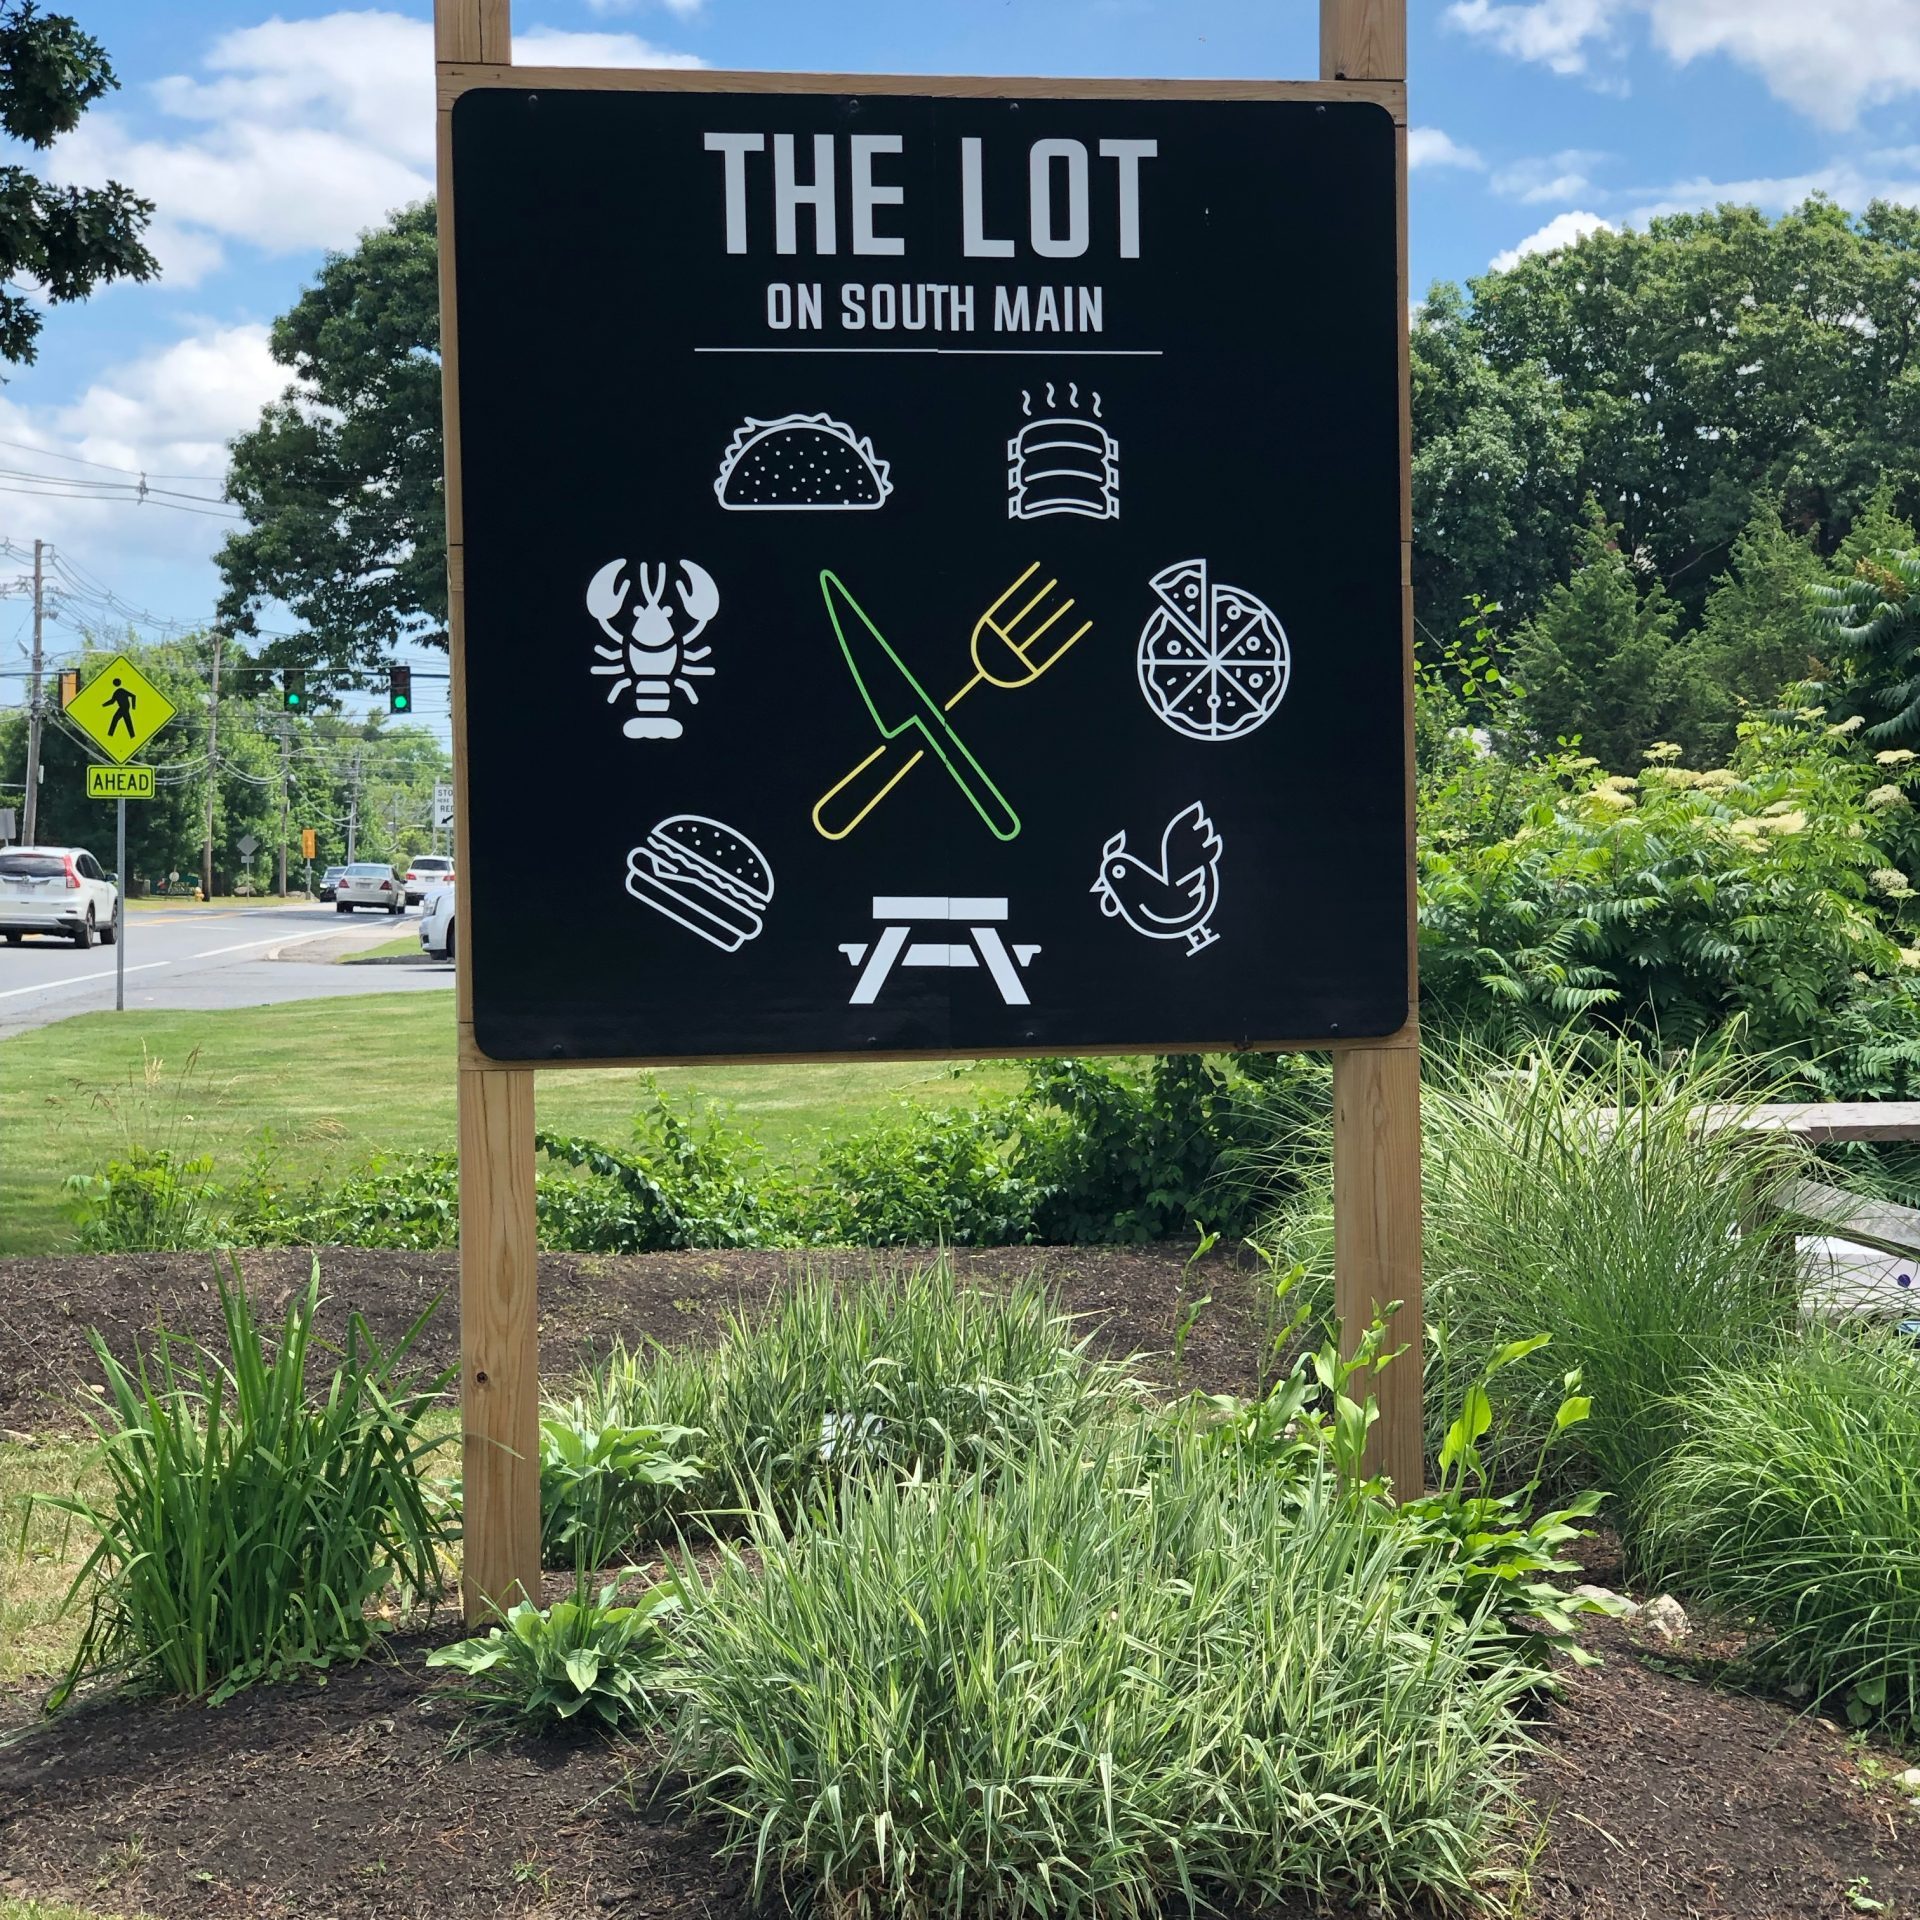 A sign titled "the lot on south main" with pictograms suggesting food, outdoor seating, and entertainment, backed by a green landscape and a clear sky with some clouds.